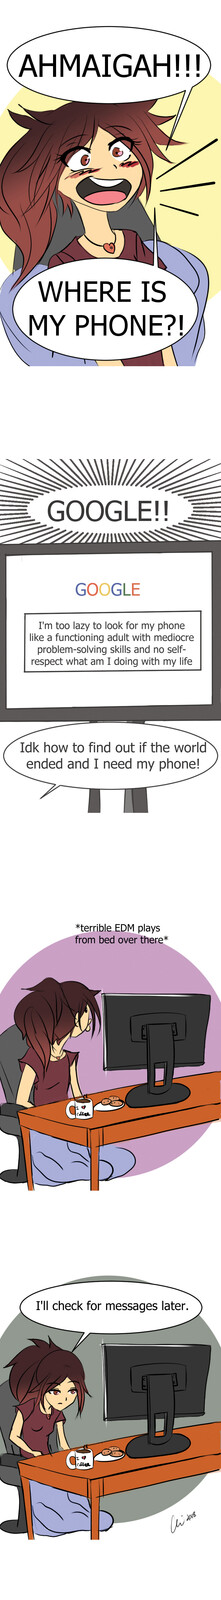 Web comic 4 - Where Is My Phone (obviously not really edited)